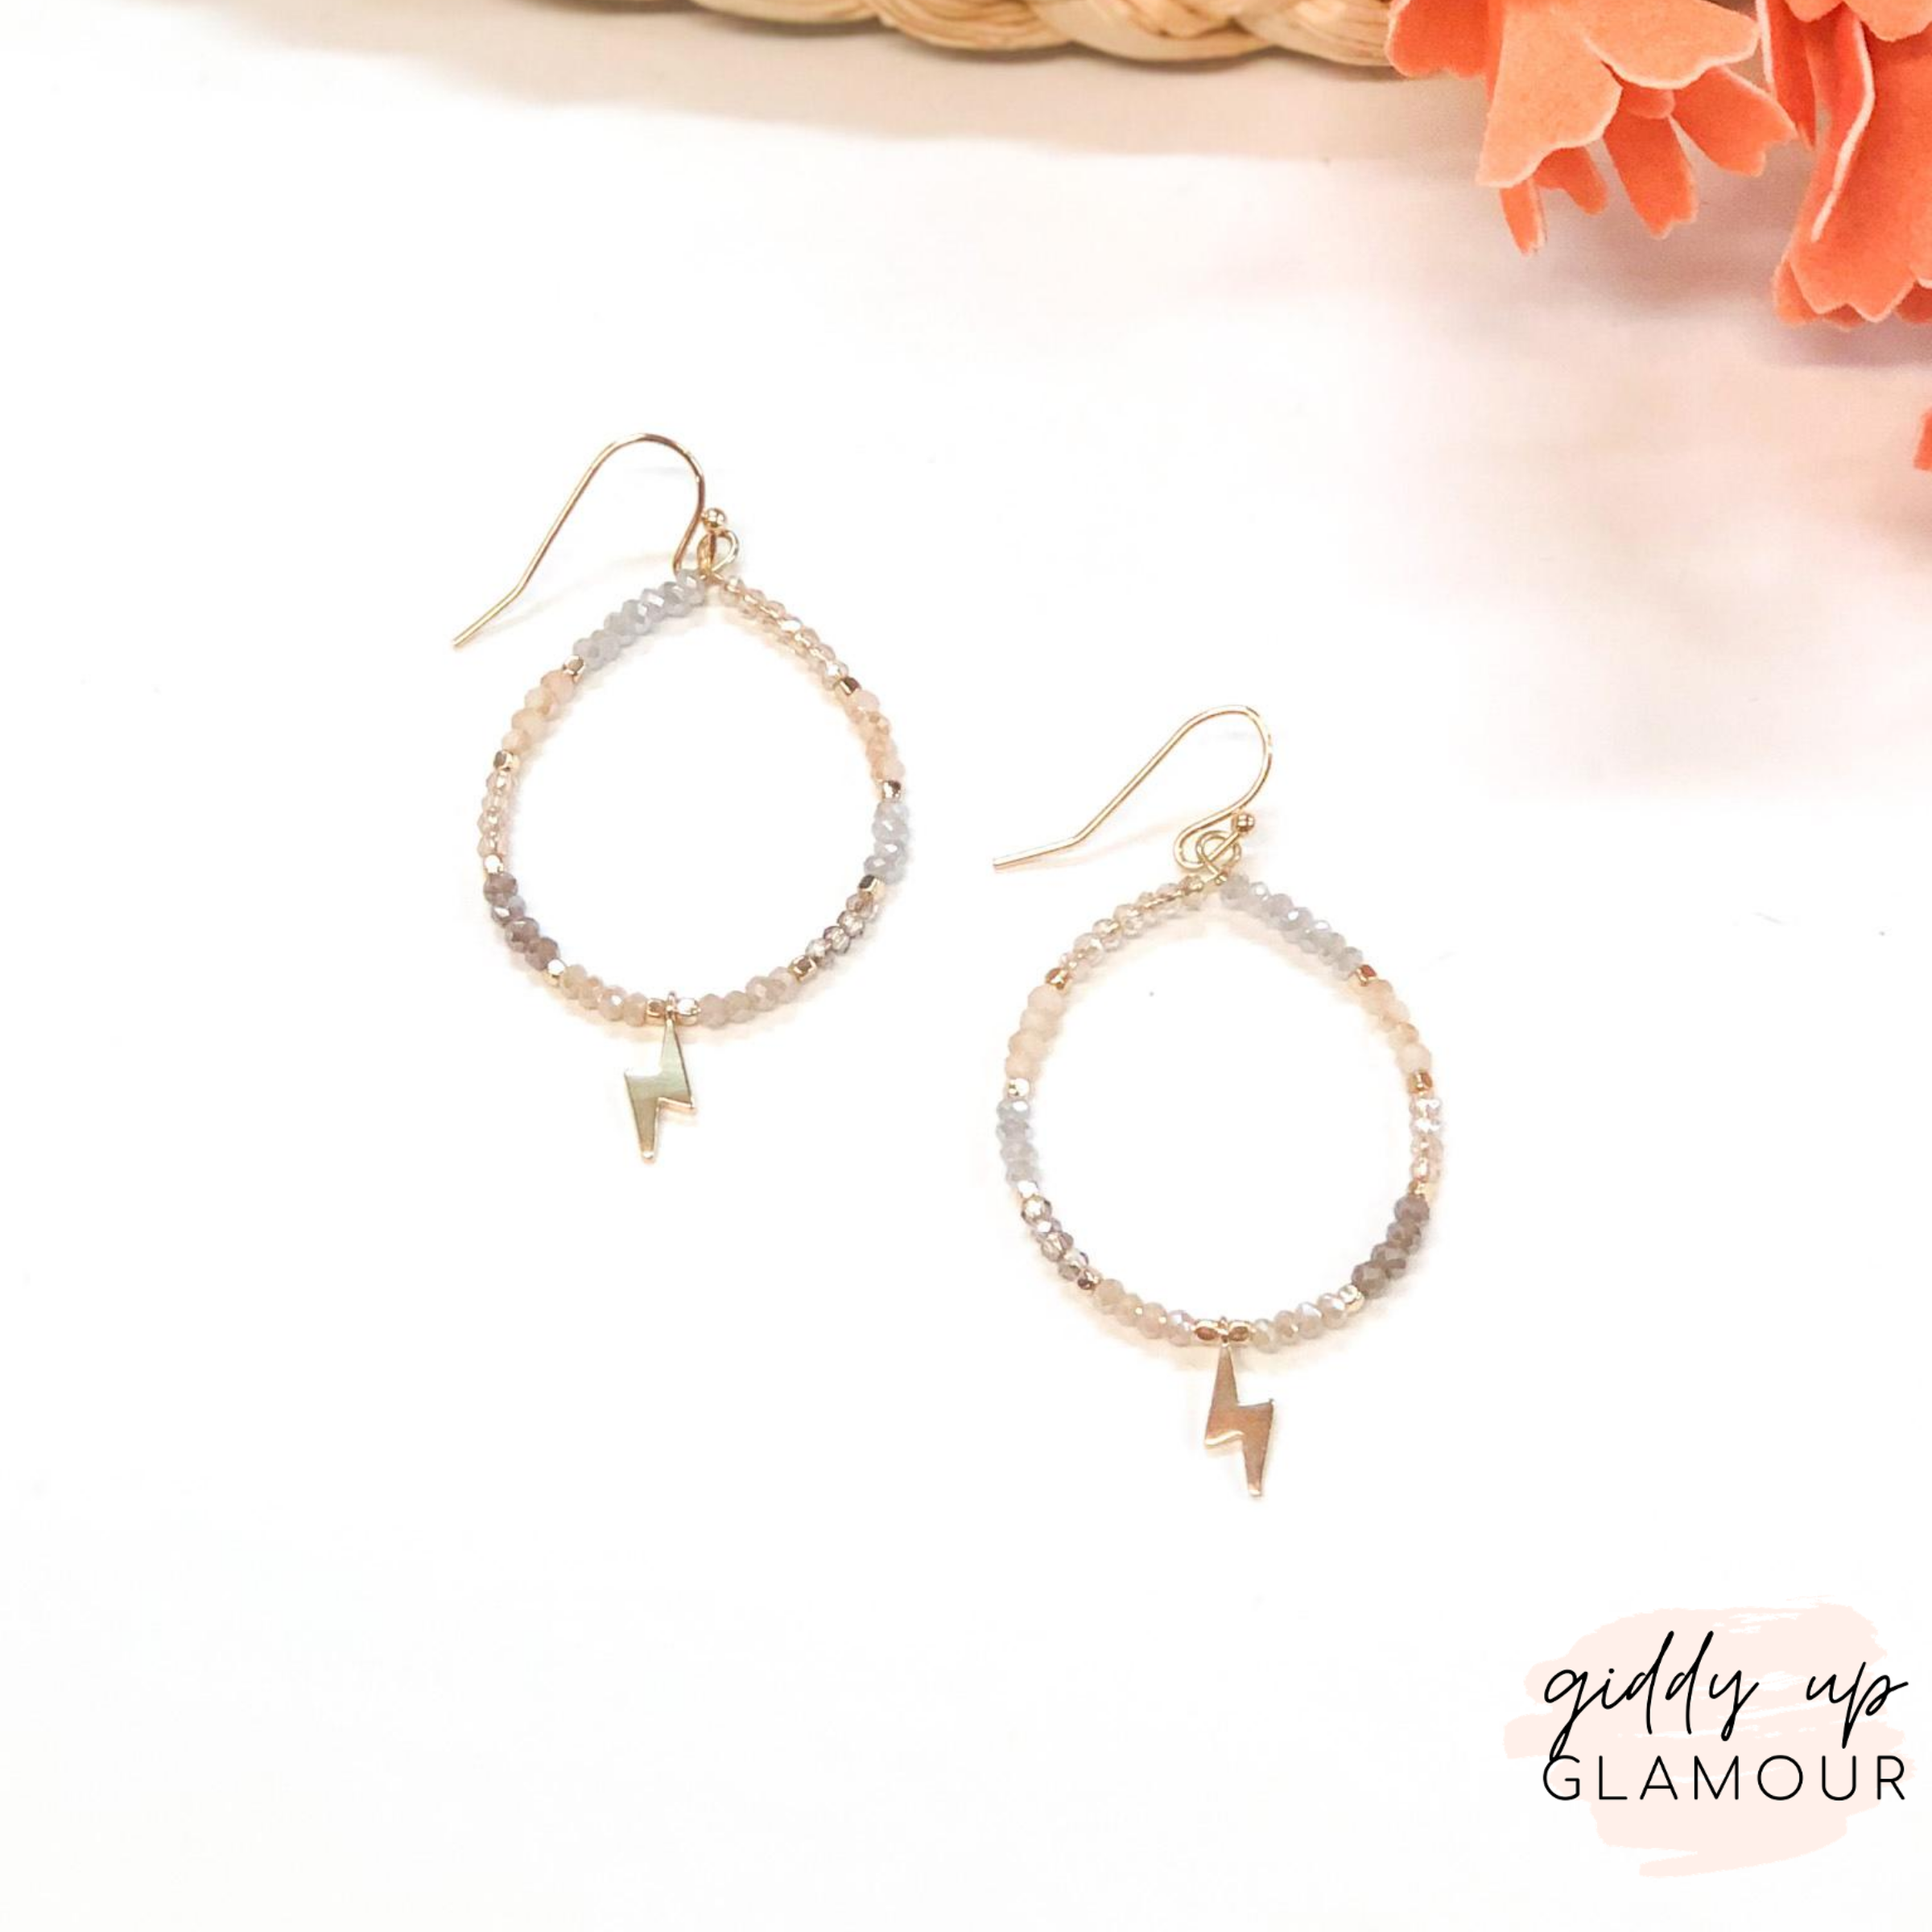 Crystal Beaded Hoop Earrings with Gold Lightning Bolts in Neutral - Giddy Up Glamour Boutique